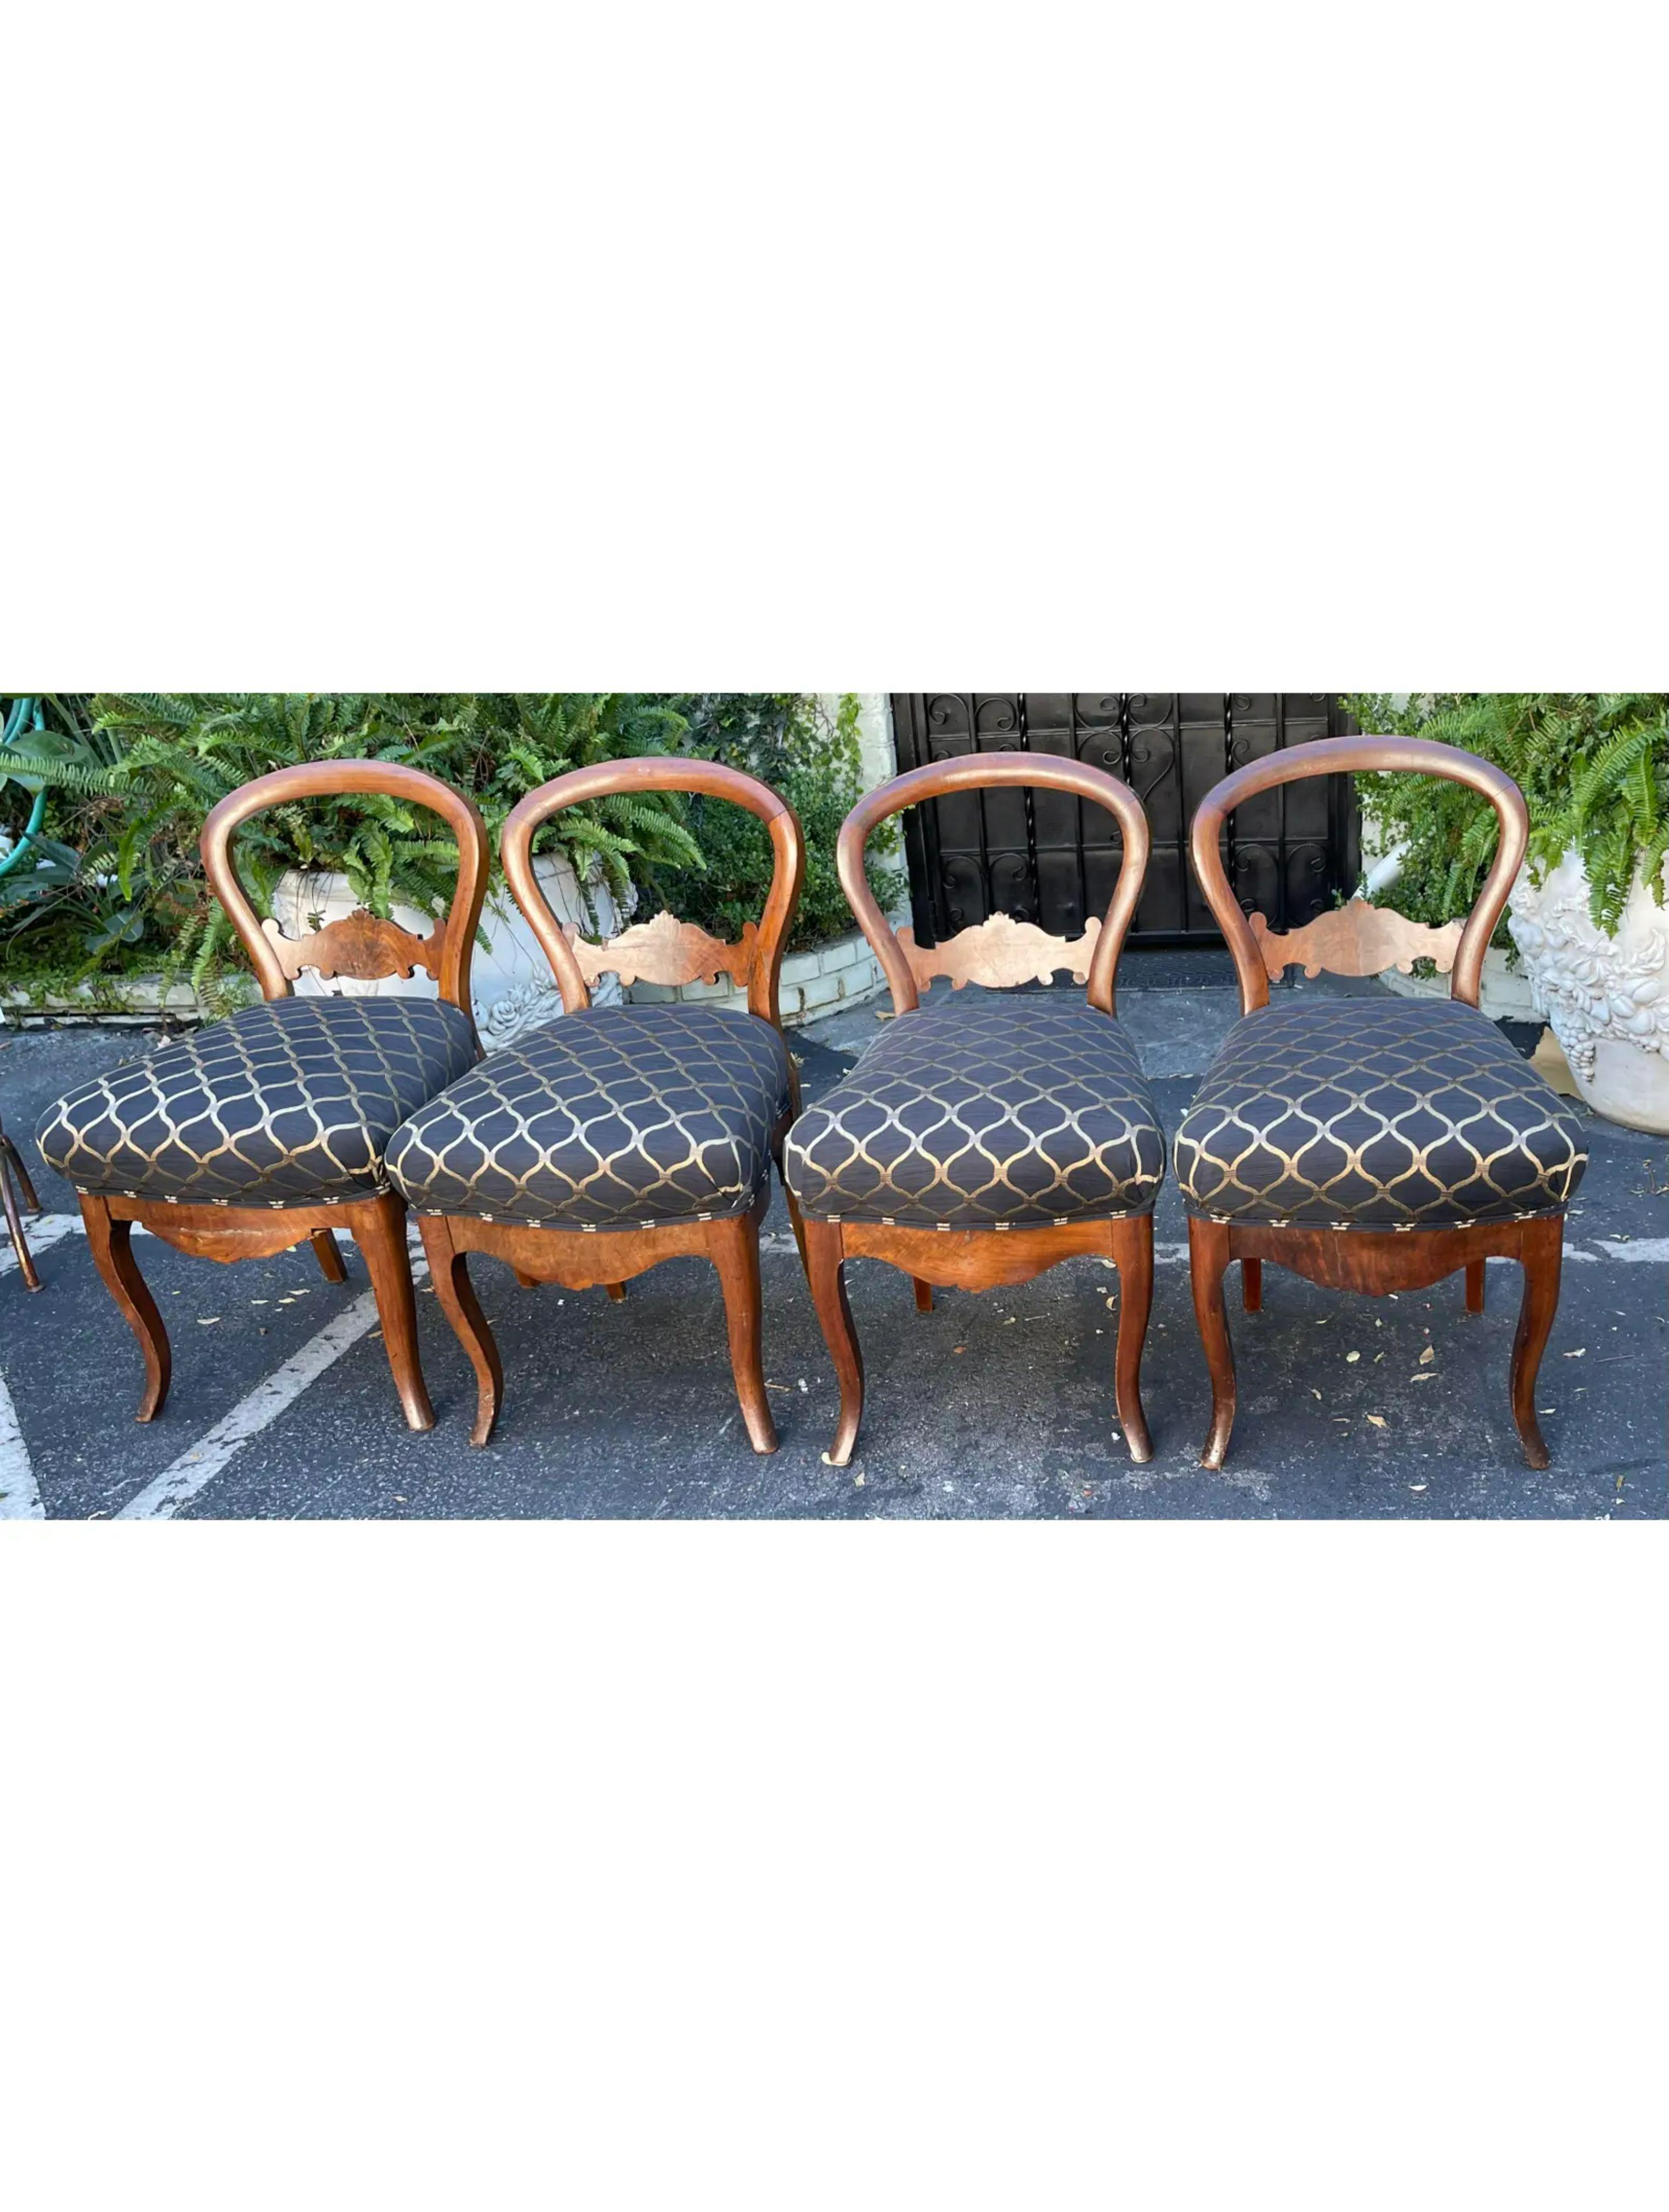 Antique Early 19th C Regency period mahogany dining chairs. Each featuring an raised upholstered seat.

Additional information:
Materials: Mahogany
Please note that this item contains materials that are legally subject to a special export